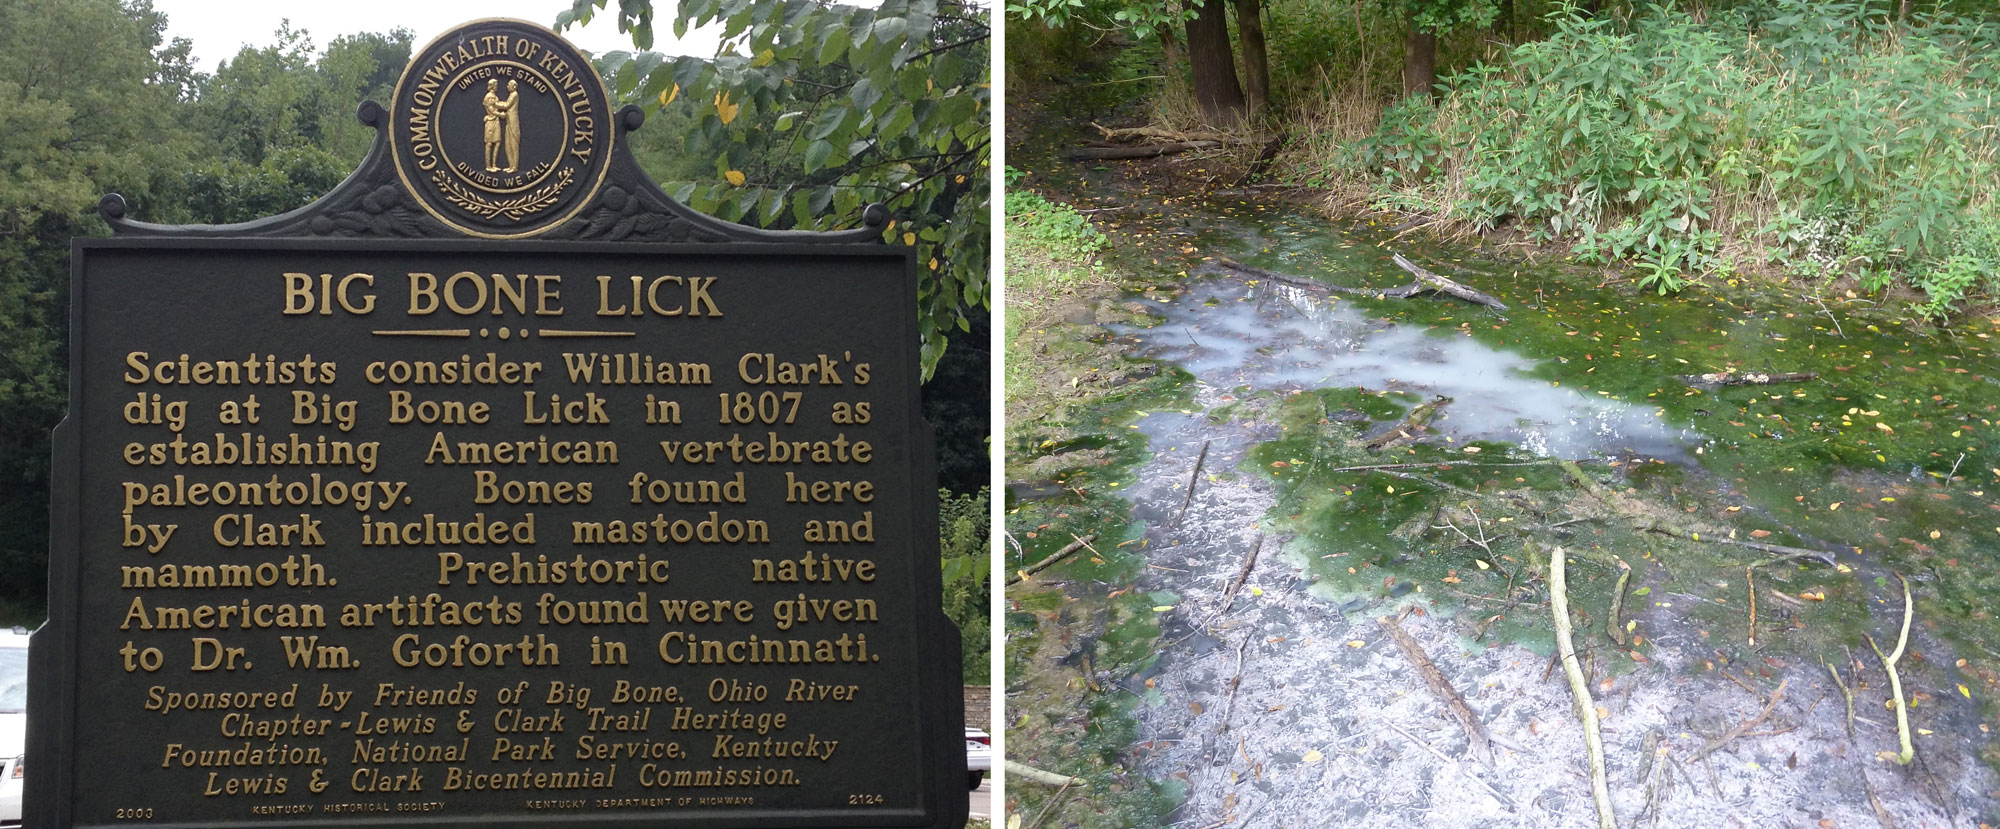 2-Panel photographic figure. Panel 1: Photo of a historical marker about Big Bone Lick: "Big Bone Lick: Scientists consider William Clark's dig at Big Bone Lick in 1807 as establishing American Vertebrate paleontology. Bones found here by Clark included mastodon and mammoth. Prehistoric native American artifacts found were given to Dr. Wm. Goforth in Cincinnati." Panel 2: Photo of a salt spring showing cloudy water caused by the presence of salt.